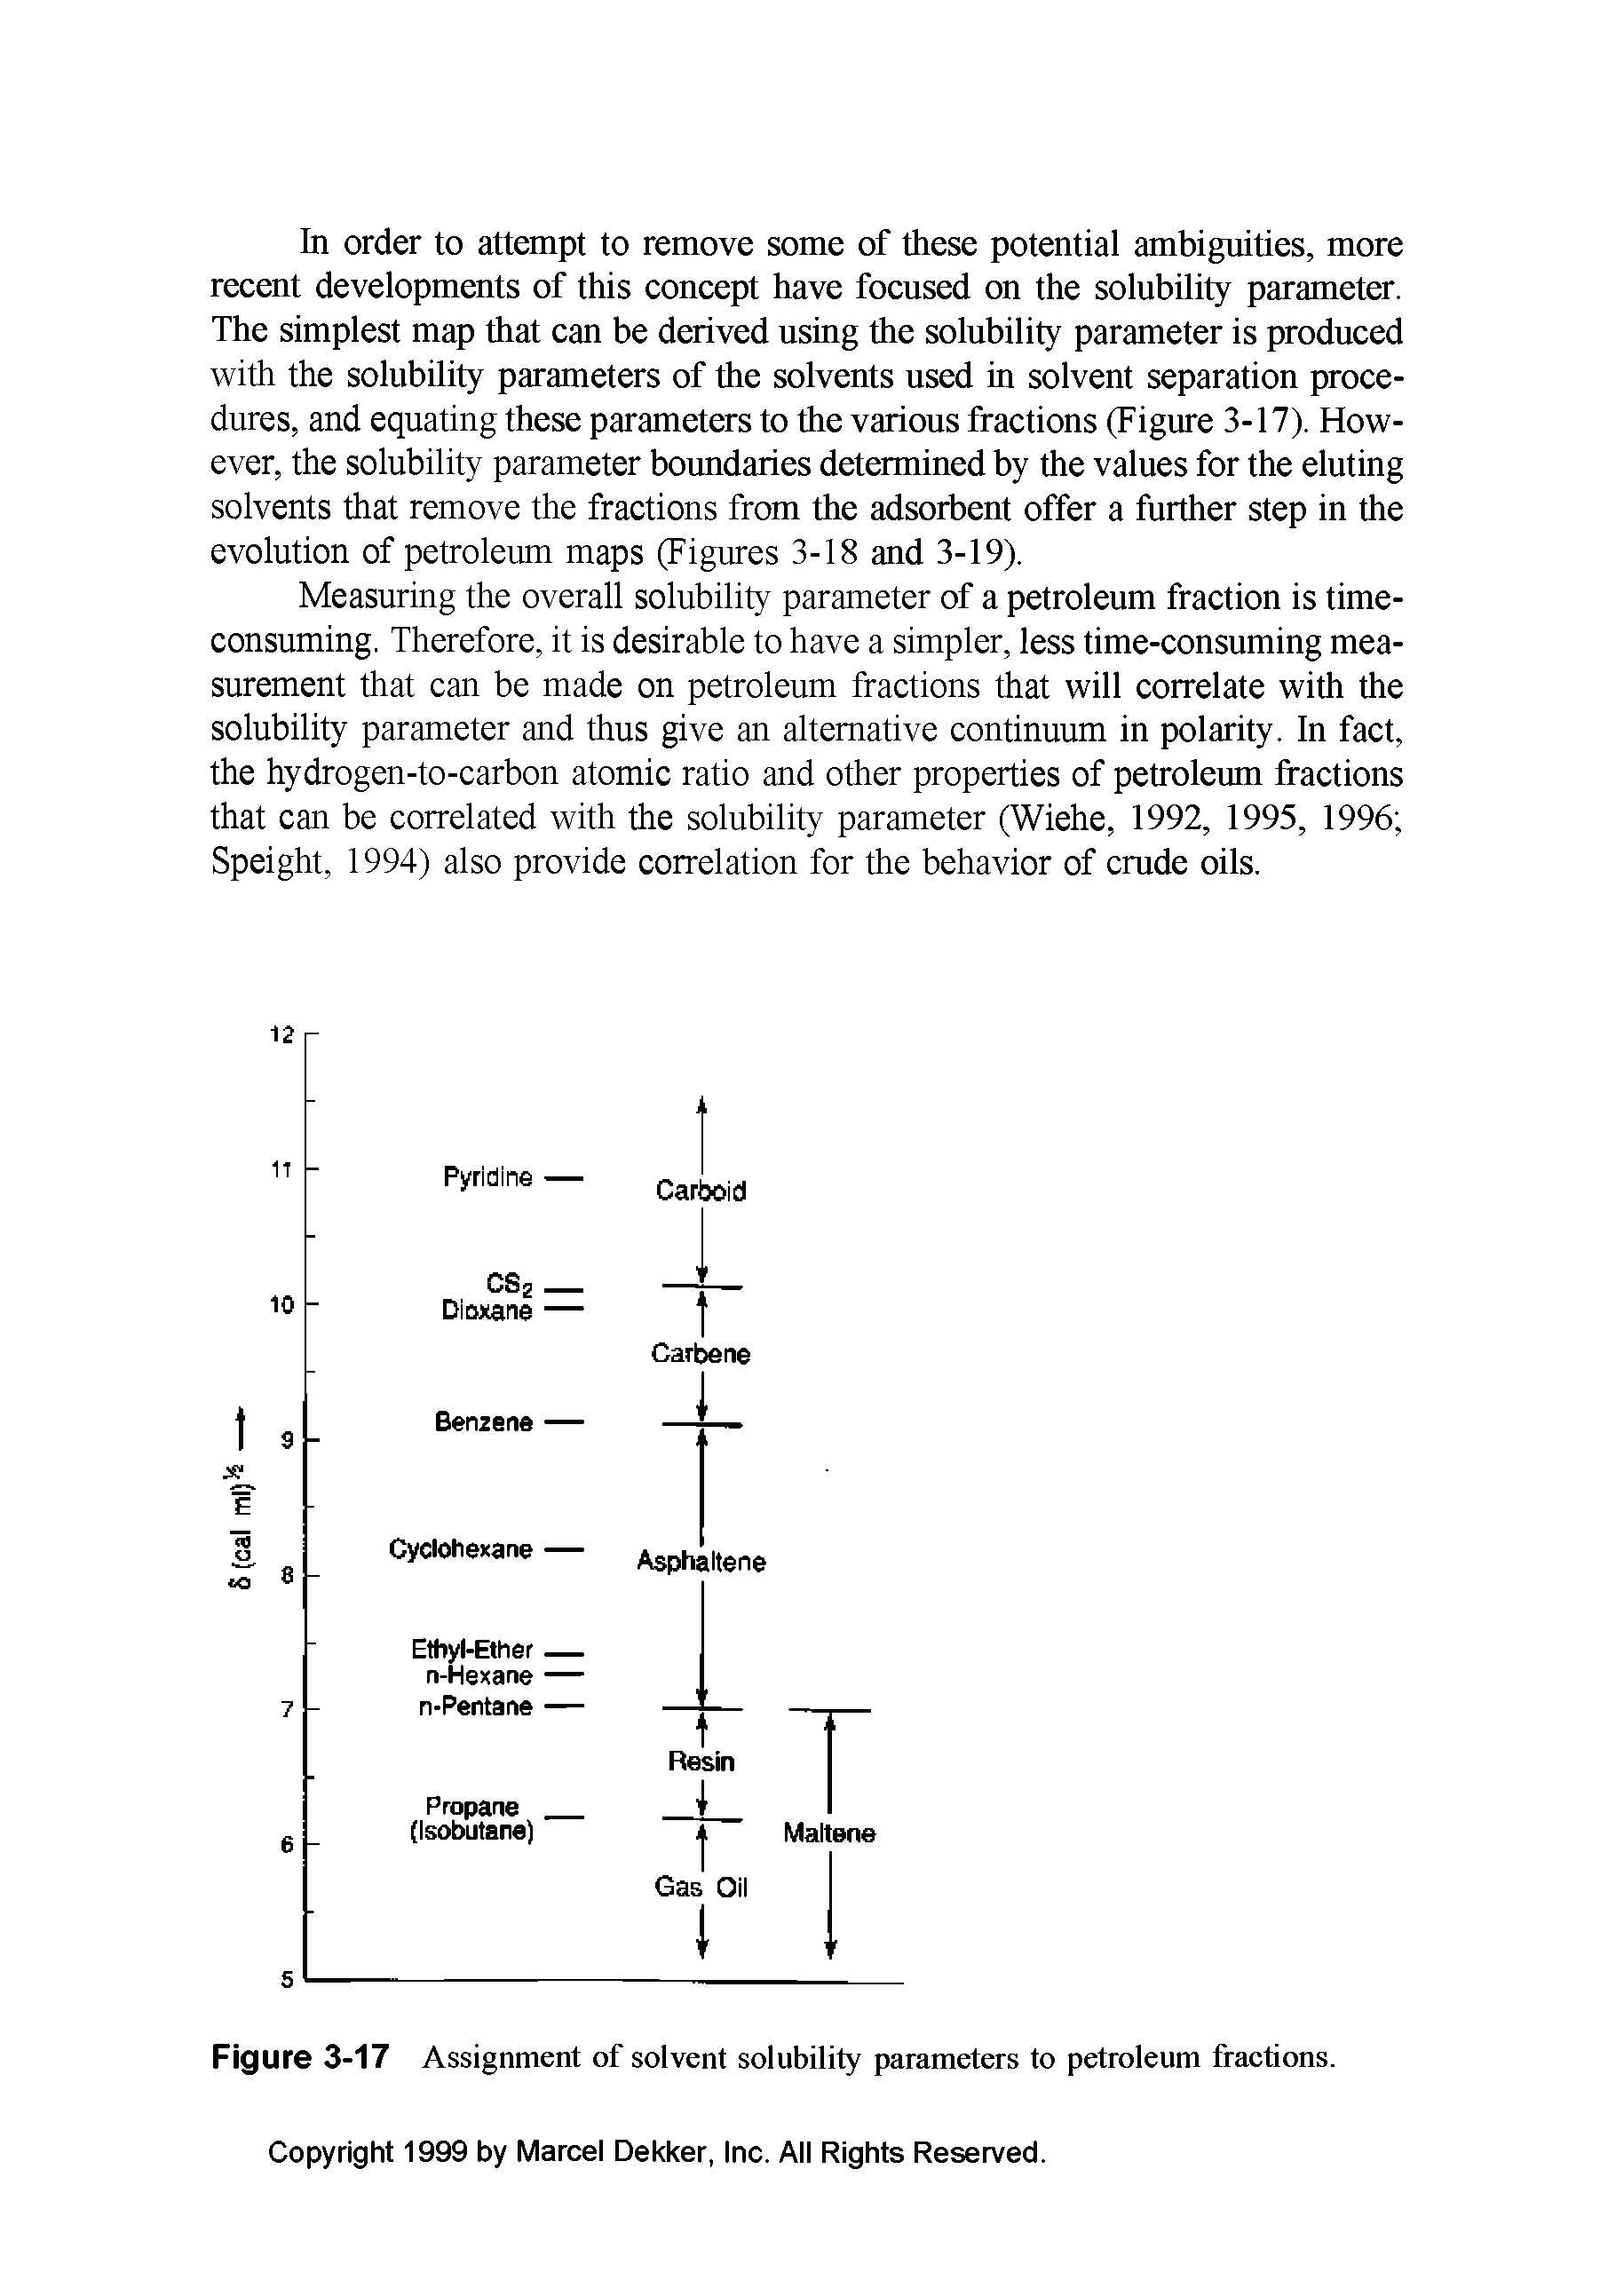 Figure 3-17 Assignment of solvent solubility parameters to petroleum fractions.